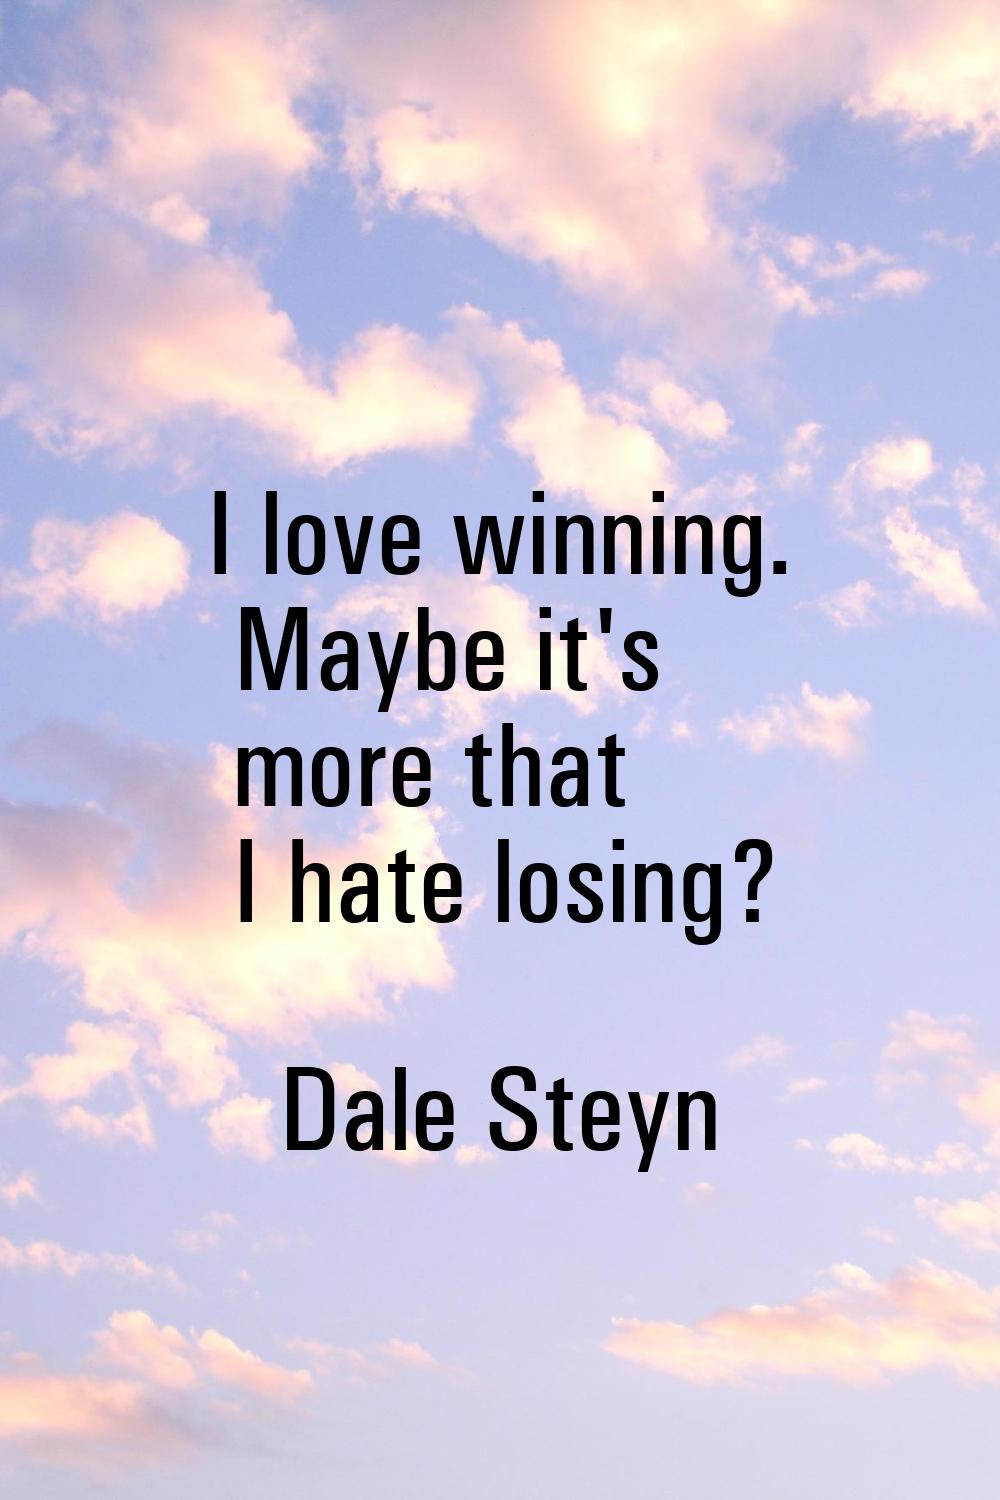 I love winning. Maybe it's more that I hate losing?